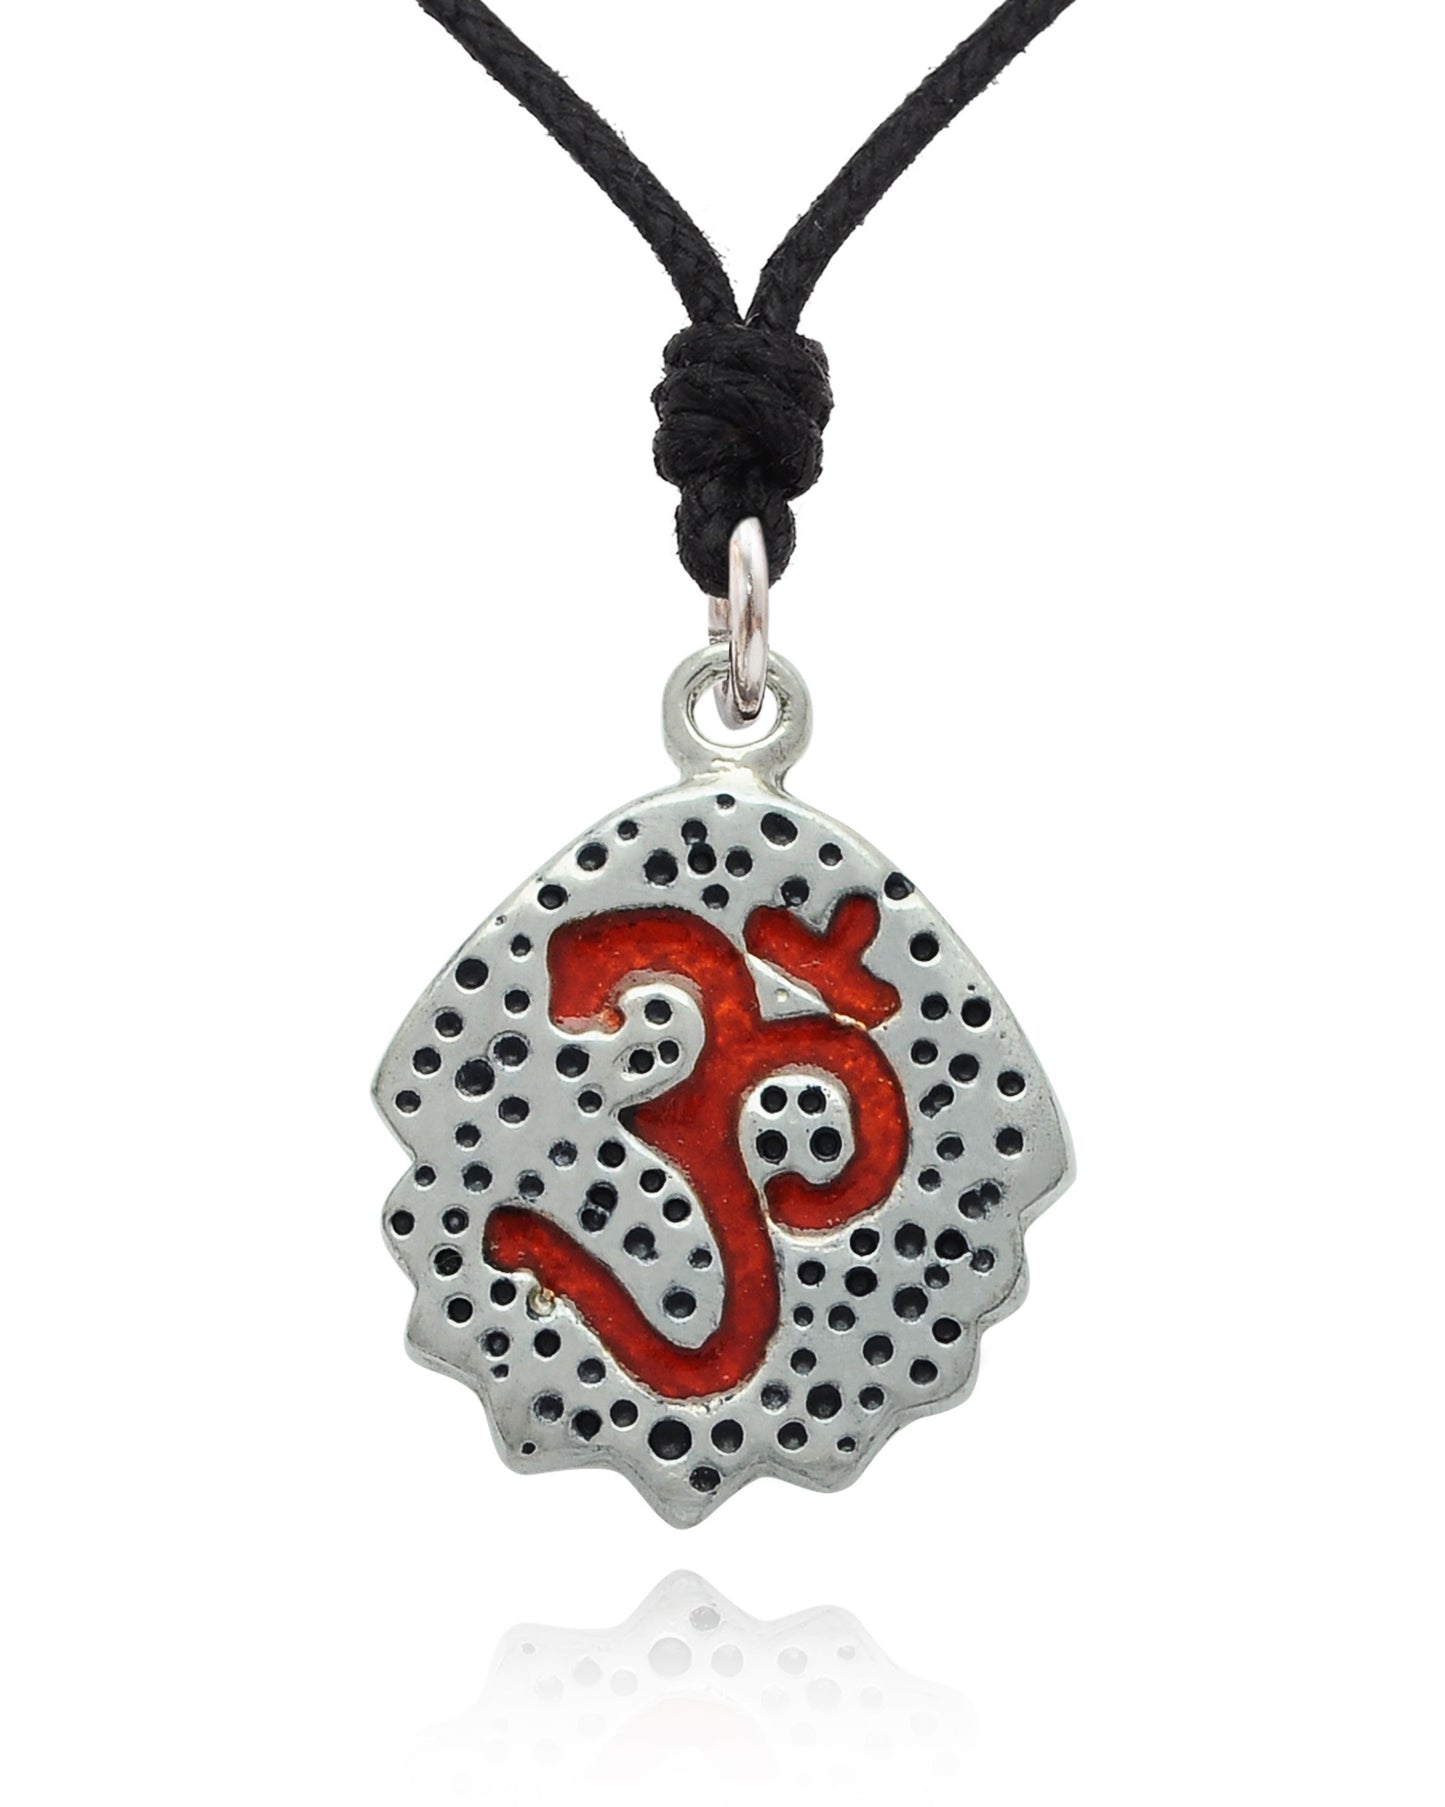 New Classy Hindu Symbol Silver Pewter Charm Necklace Pendant Jewelry